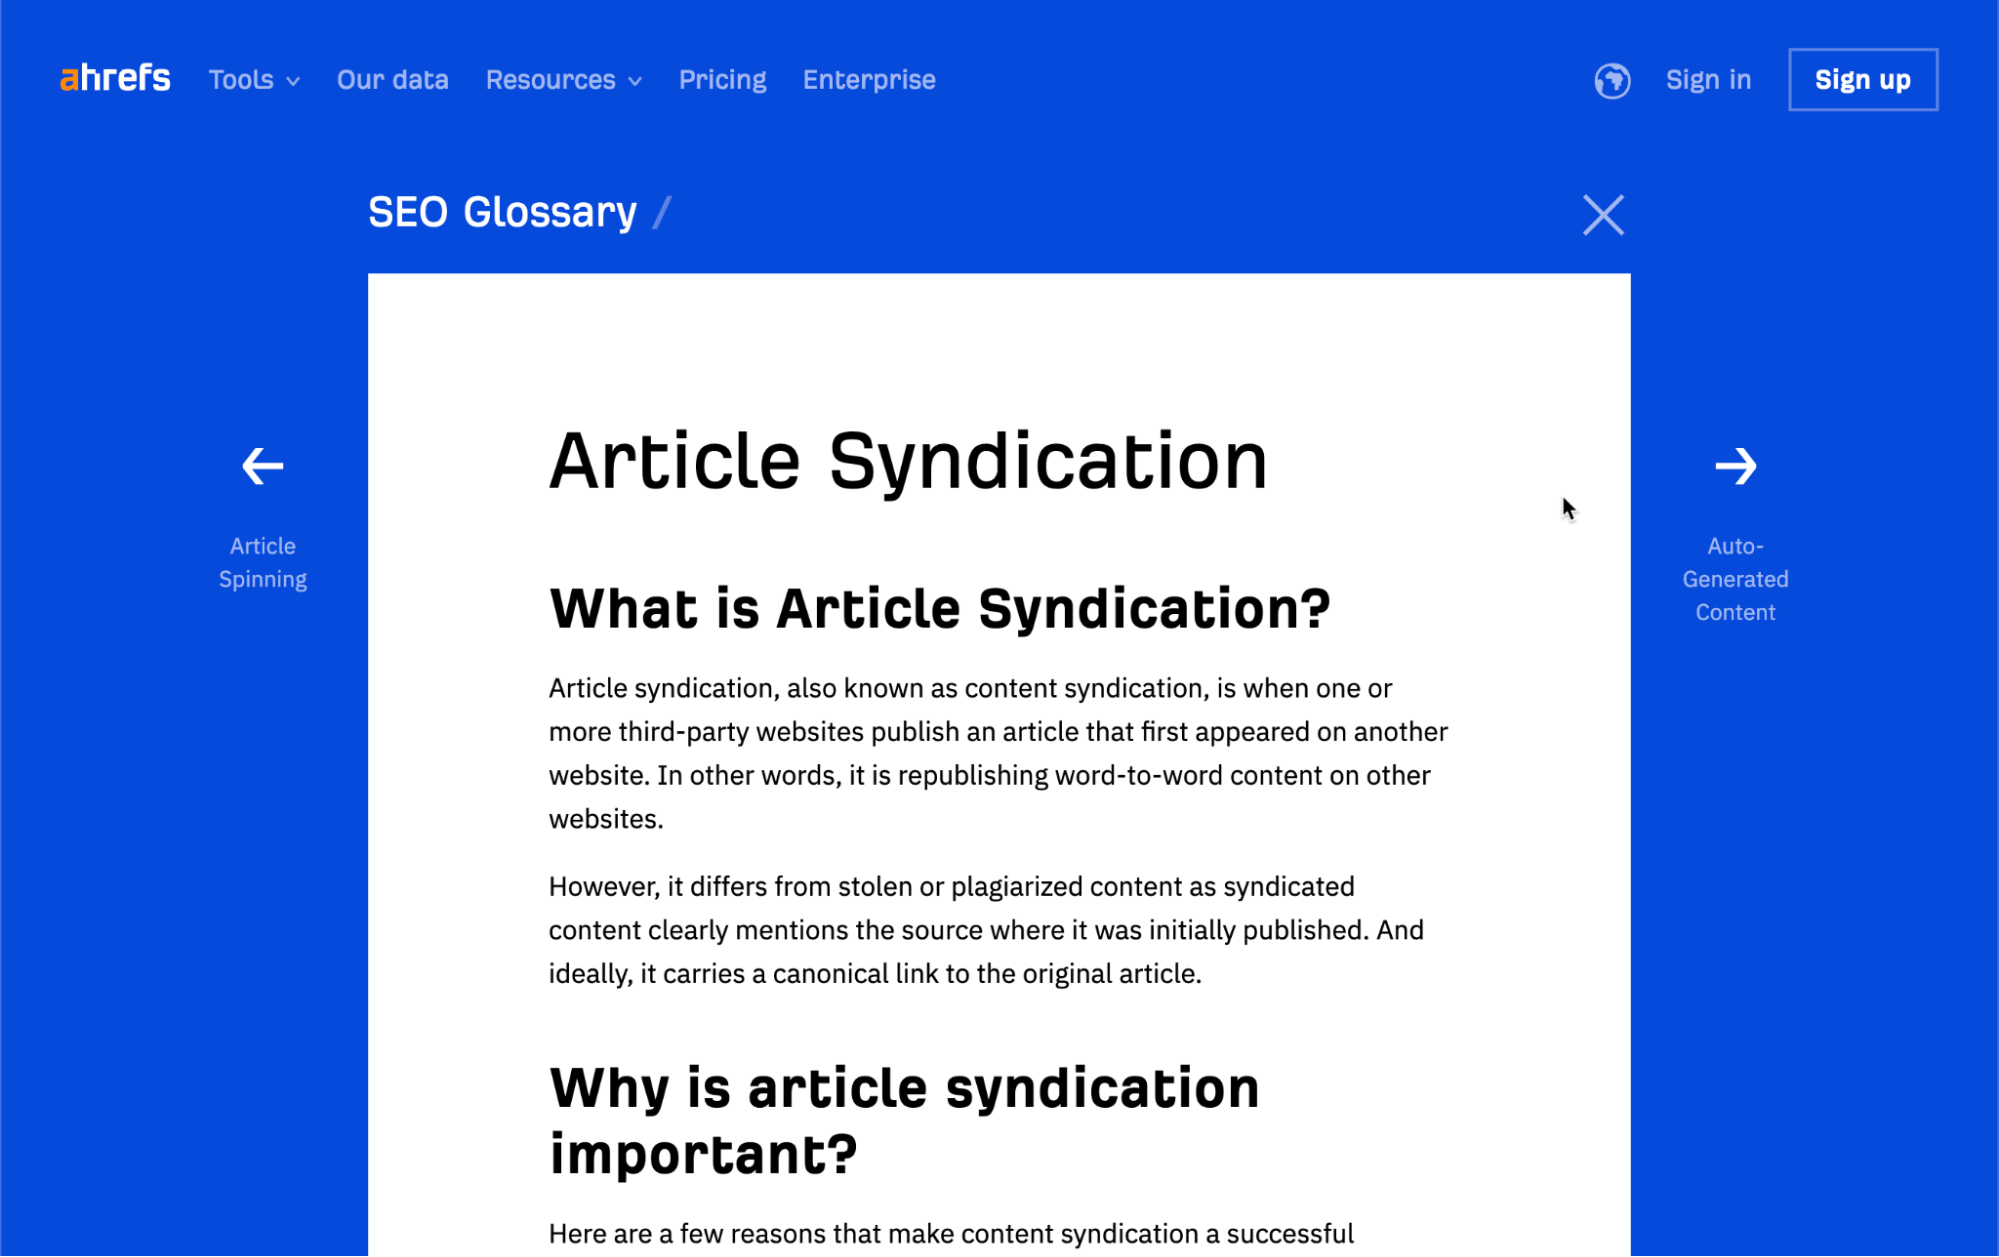 Our glossary post about article syndication
